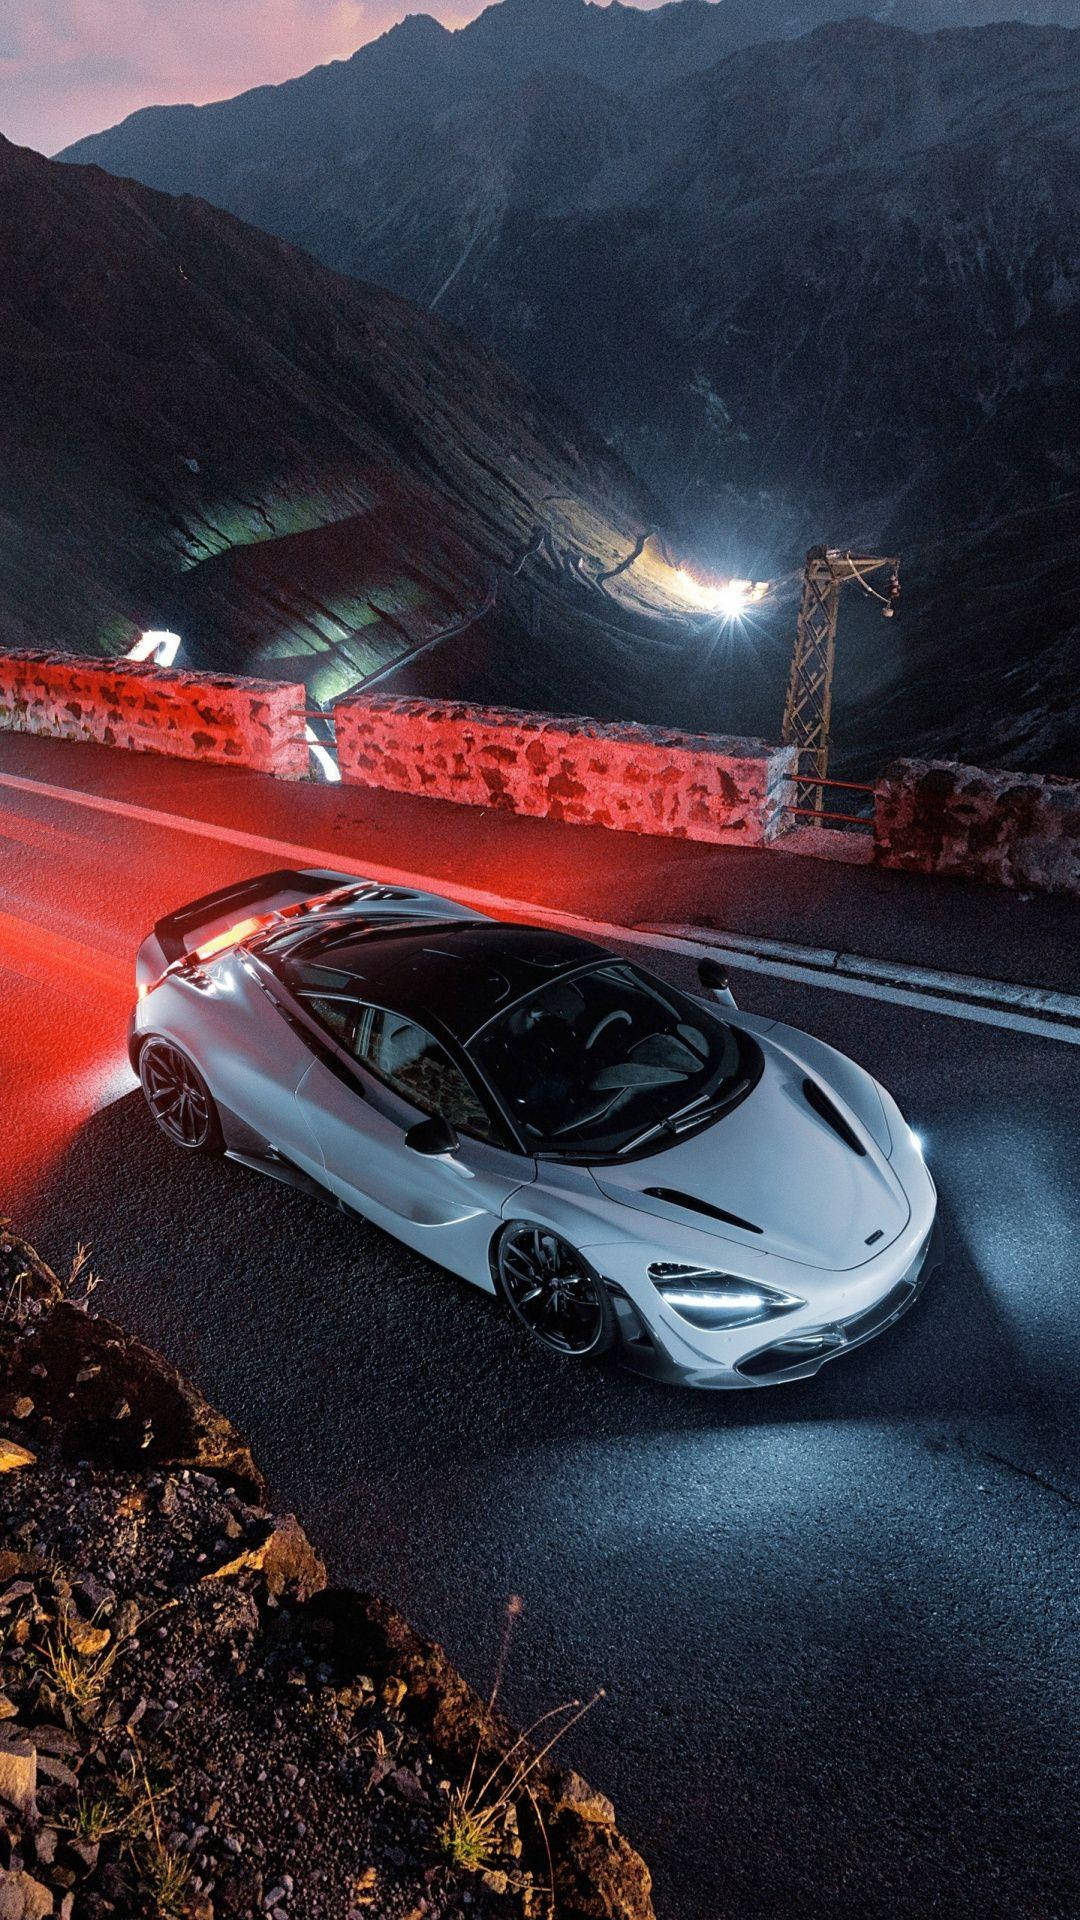 A Mclaren 720s Showcased In All Its Magnificence Under Aesthetic Lighting Wallpaper